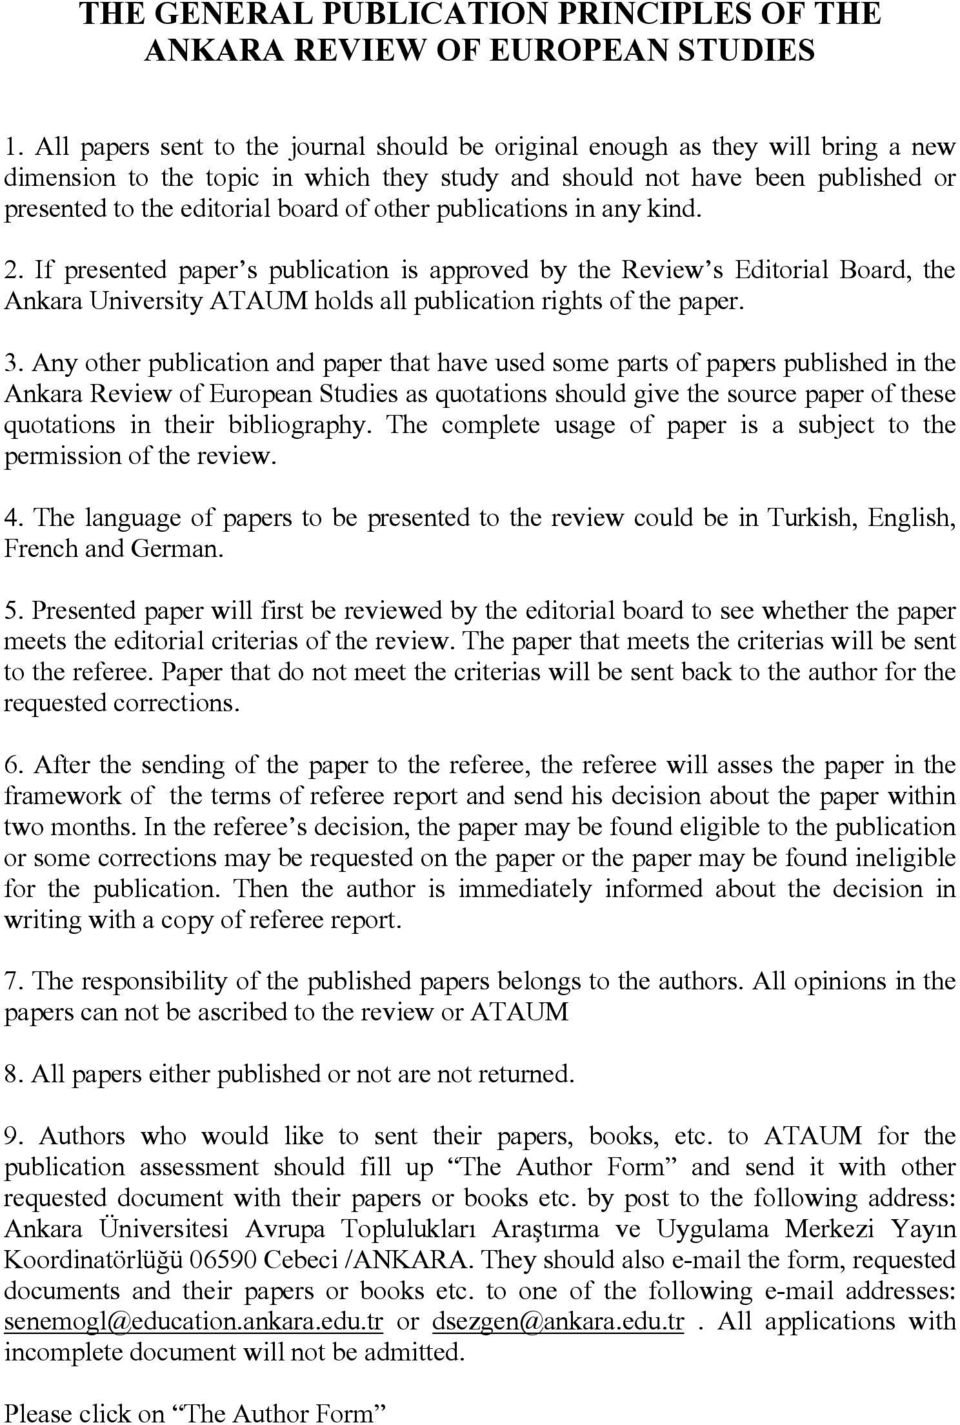 other publications in any kind. 2. If presented paper s publication is approved by the Review s Editorial Board, the Ankara University ATAUM holds all publication rights of the paper. 3.